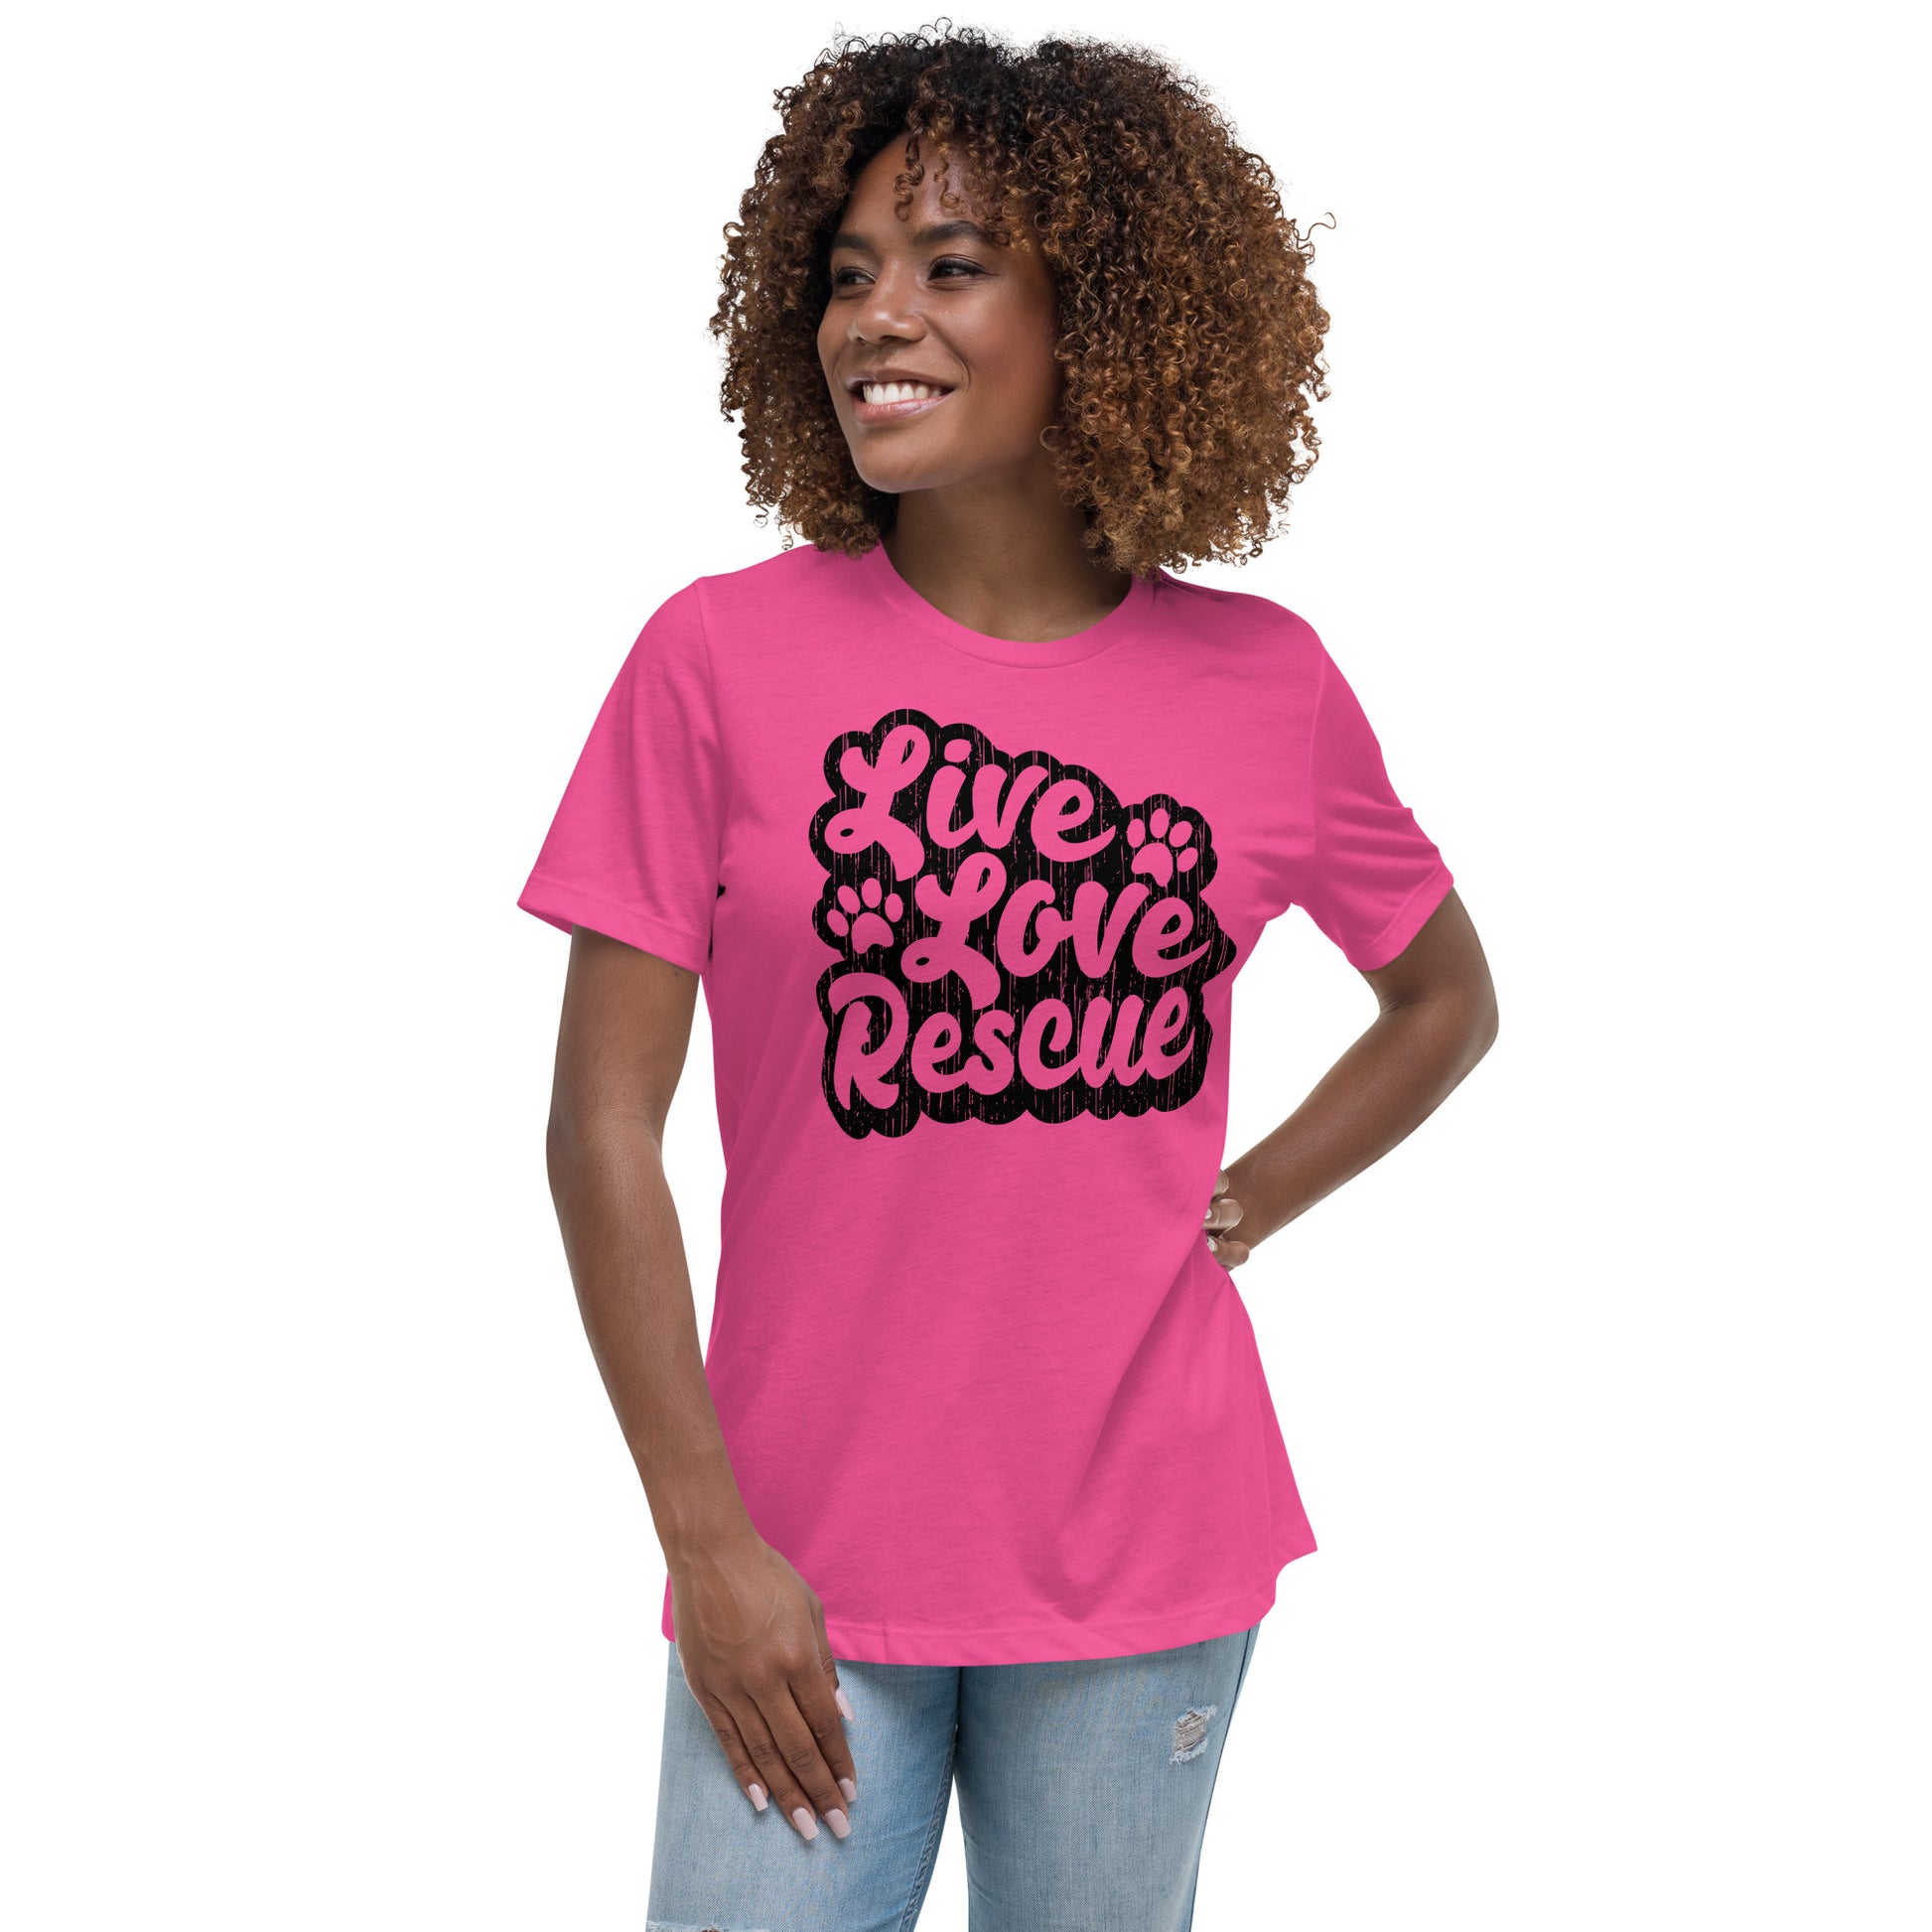 Live love rescue retro women’s relaxed fit t-shirts by Dog Artistry berry color